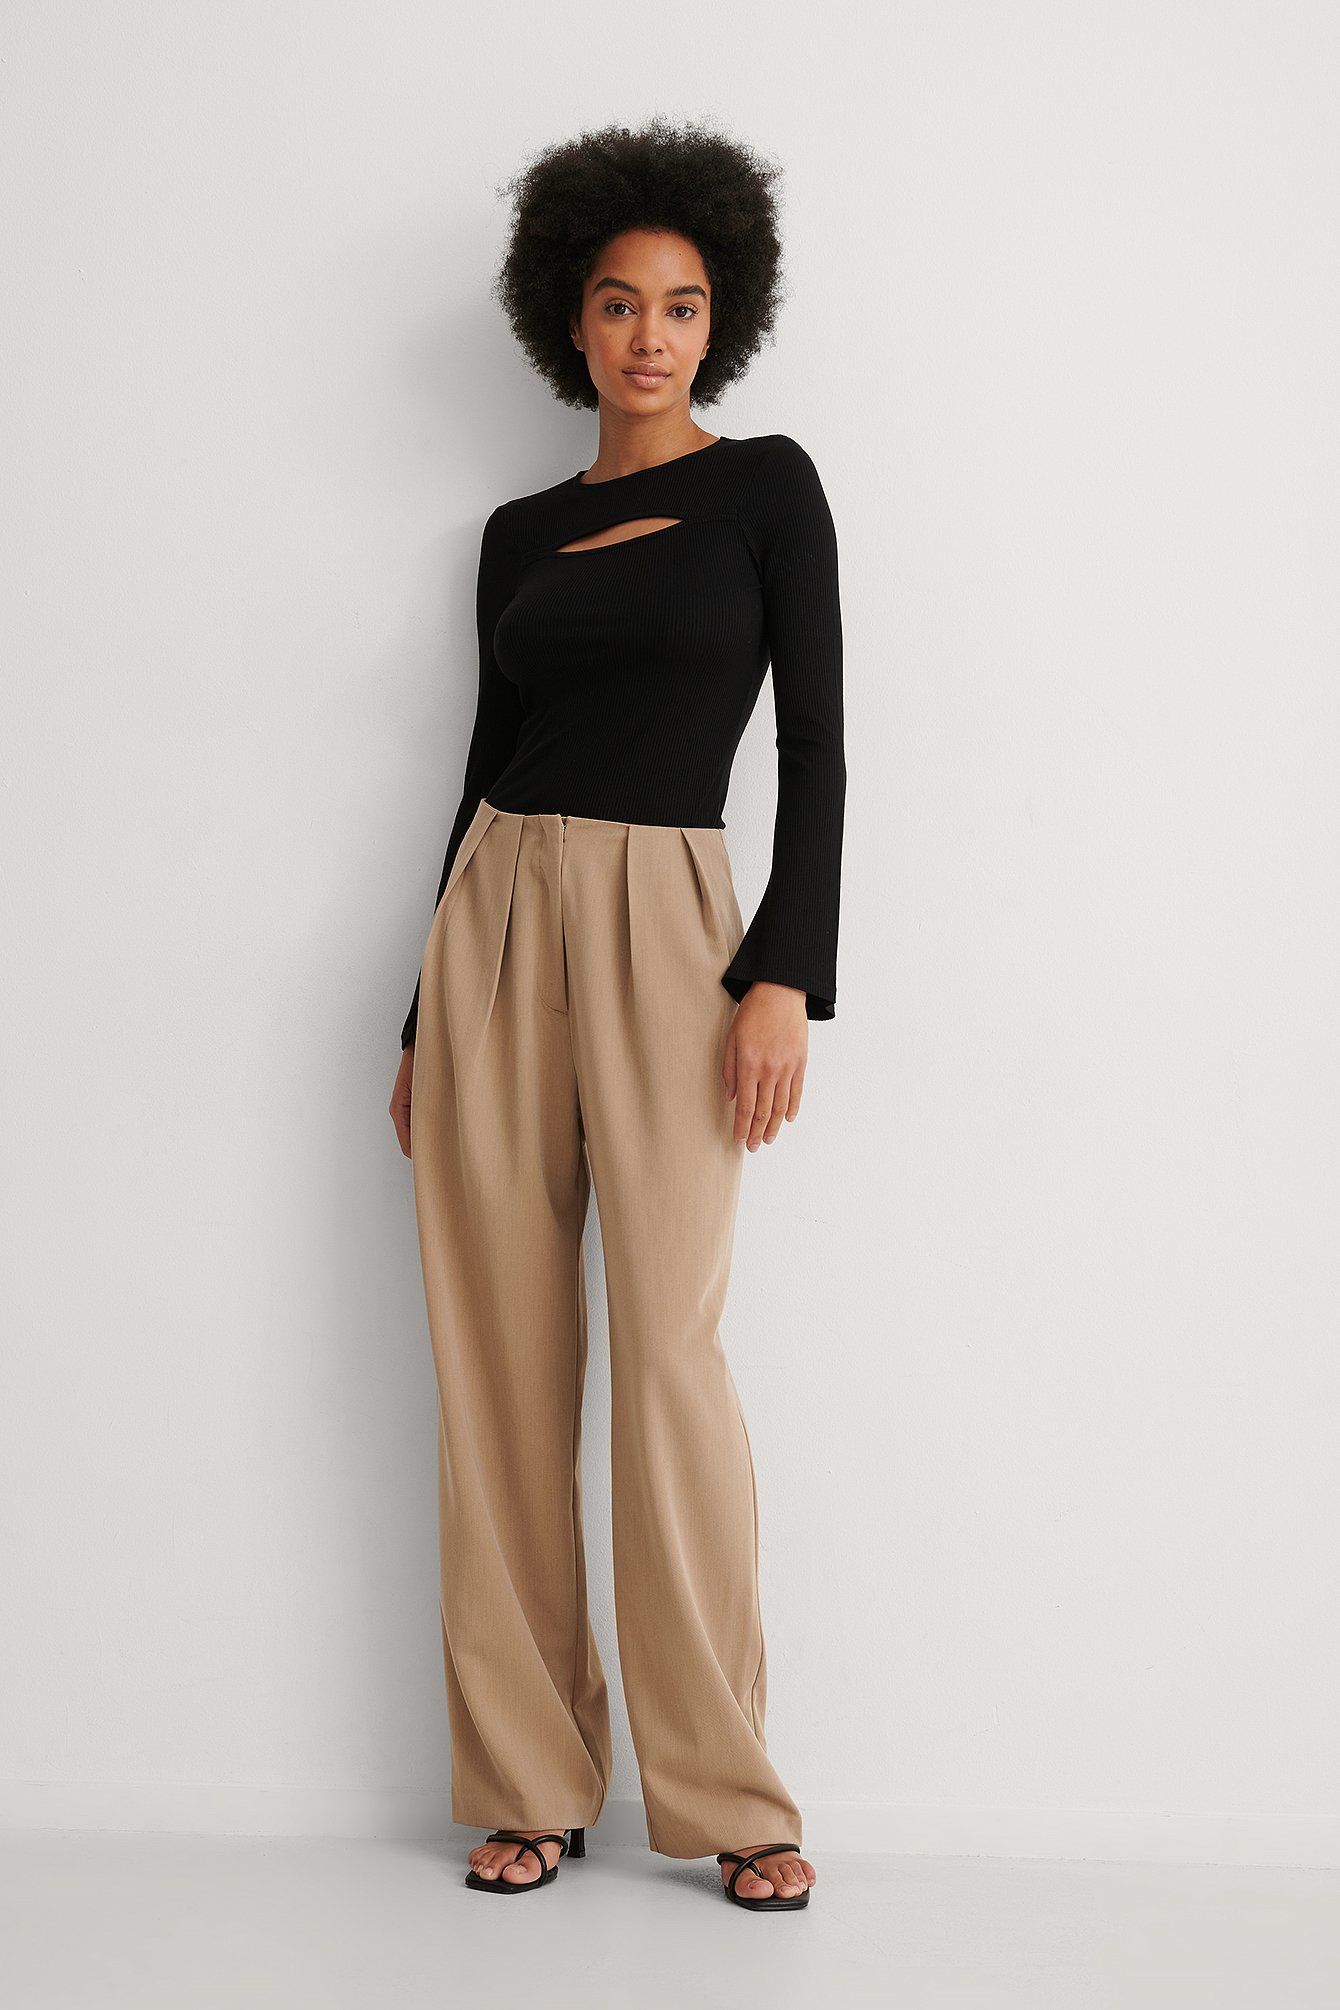 Cut Out Trumpet Sleeve Top Outfit